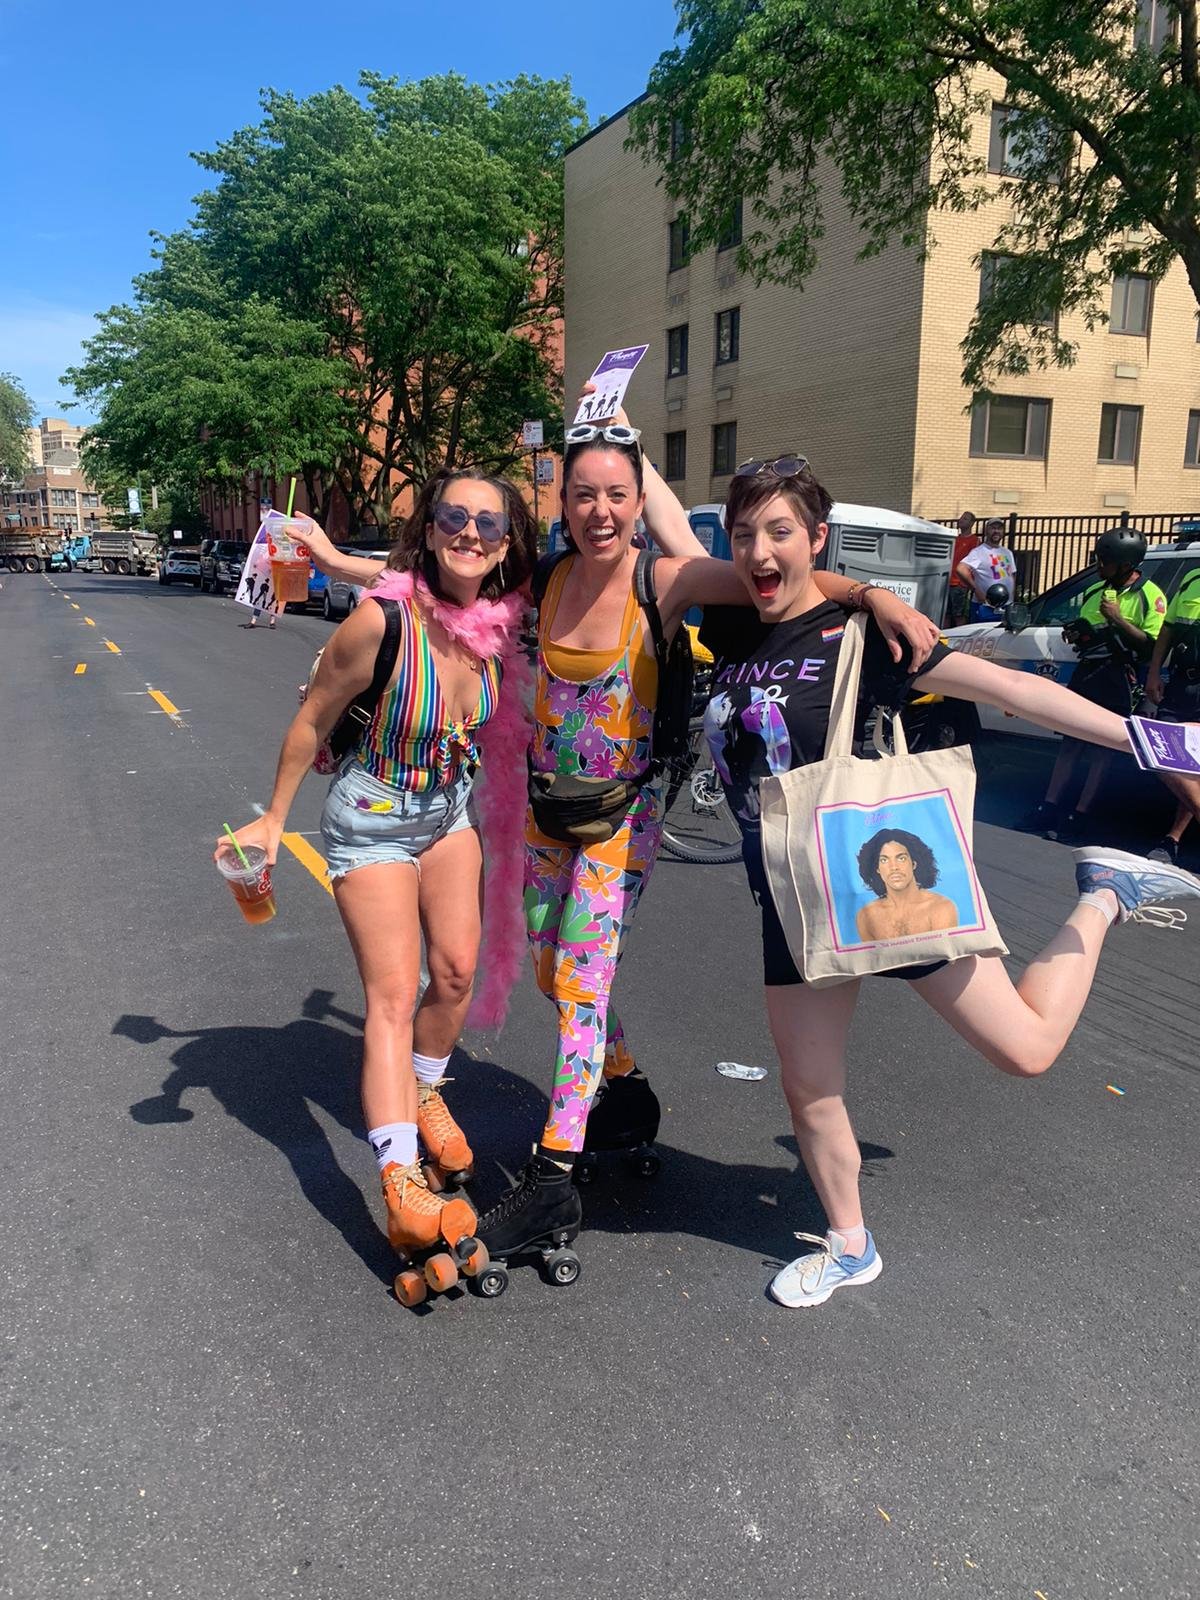 Chicago Pride - Blue Man Group and Prince Immersive Experience